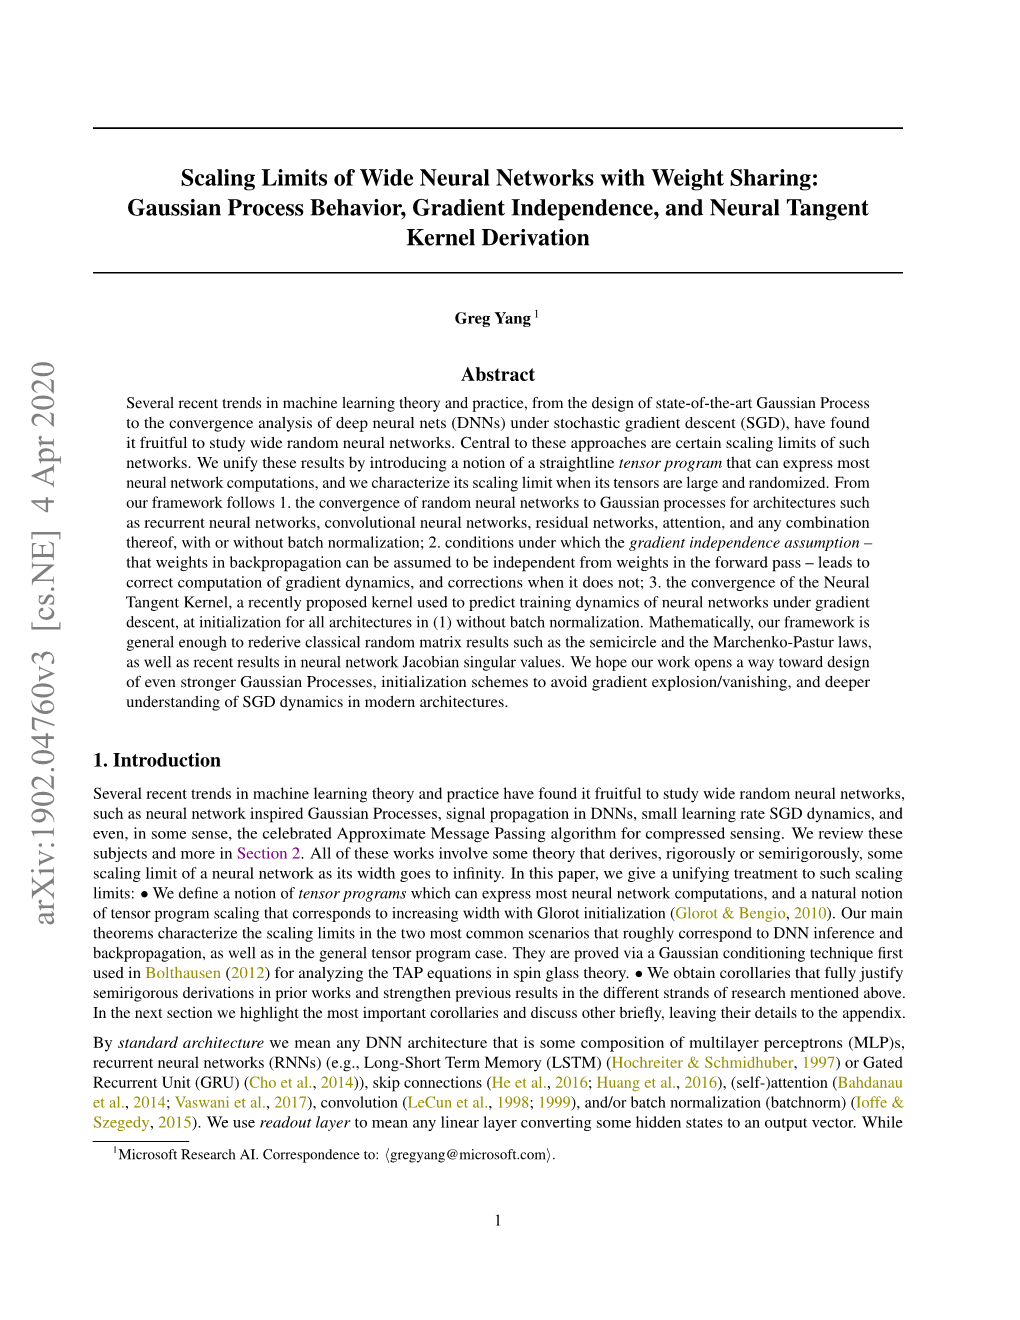 Scaling Limits of Wide Neural Networks with Weight Sharing: Gaussian Process Behavior, Gradient Independence, and Neural Tangent Kernel Derivation